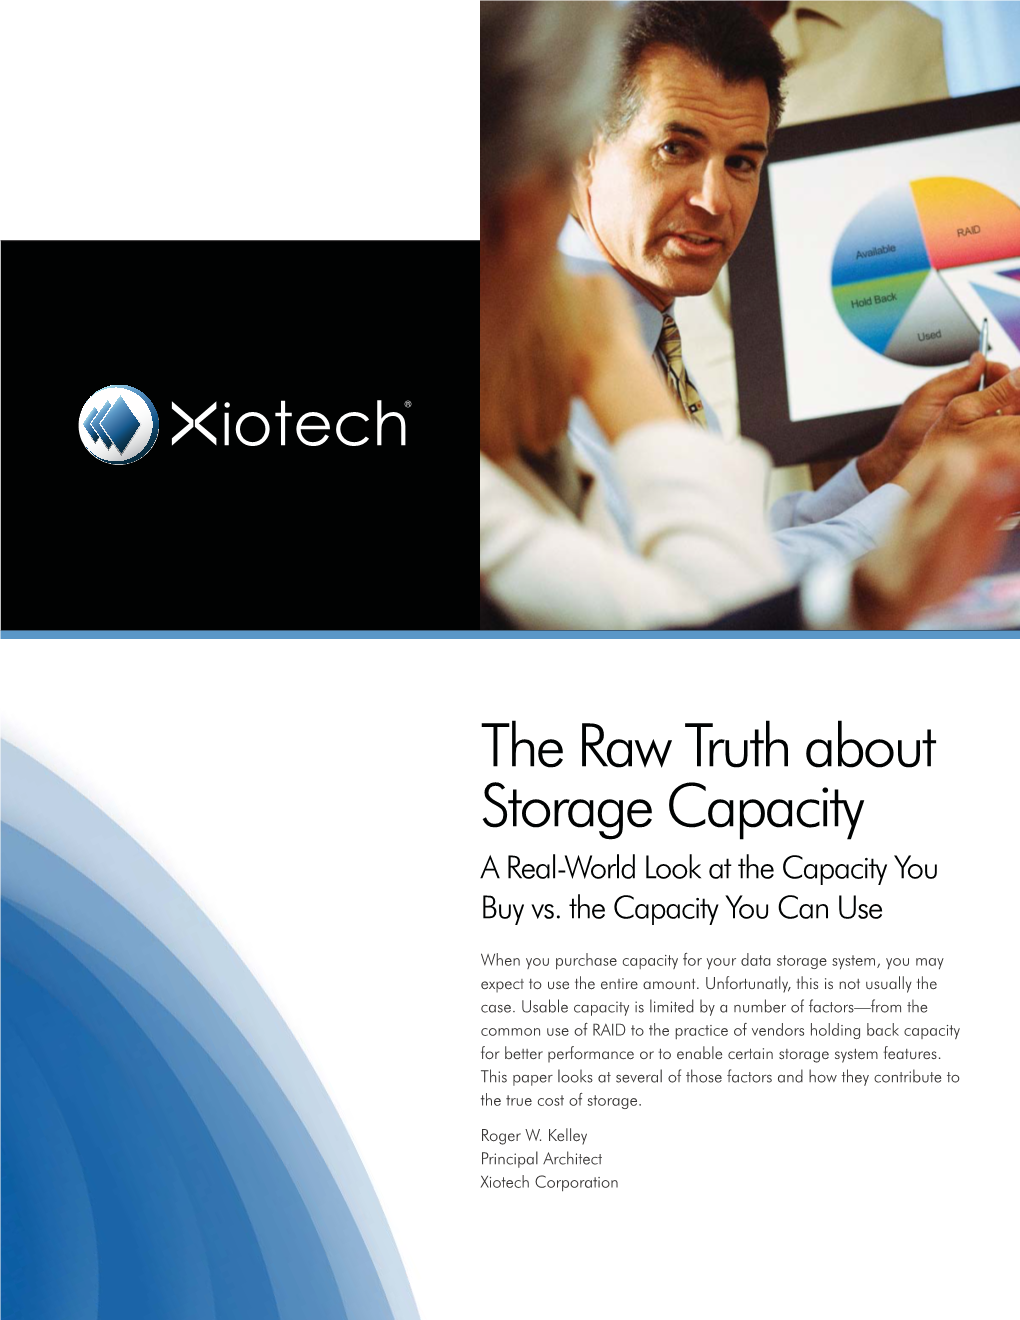 The Raw Truth About Storage Capacity White Paper